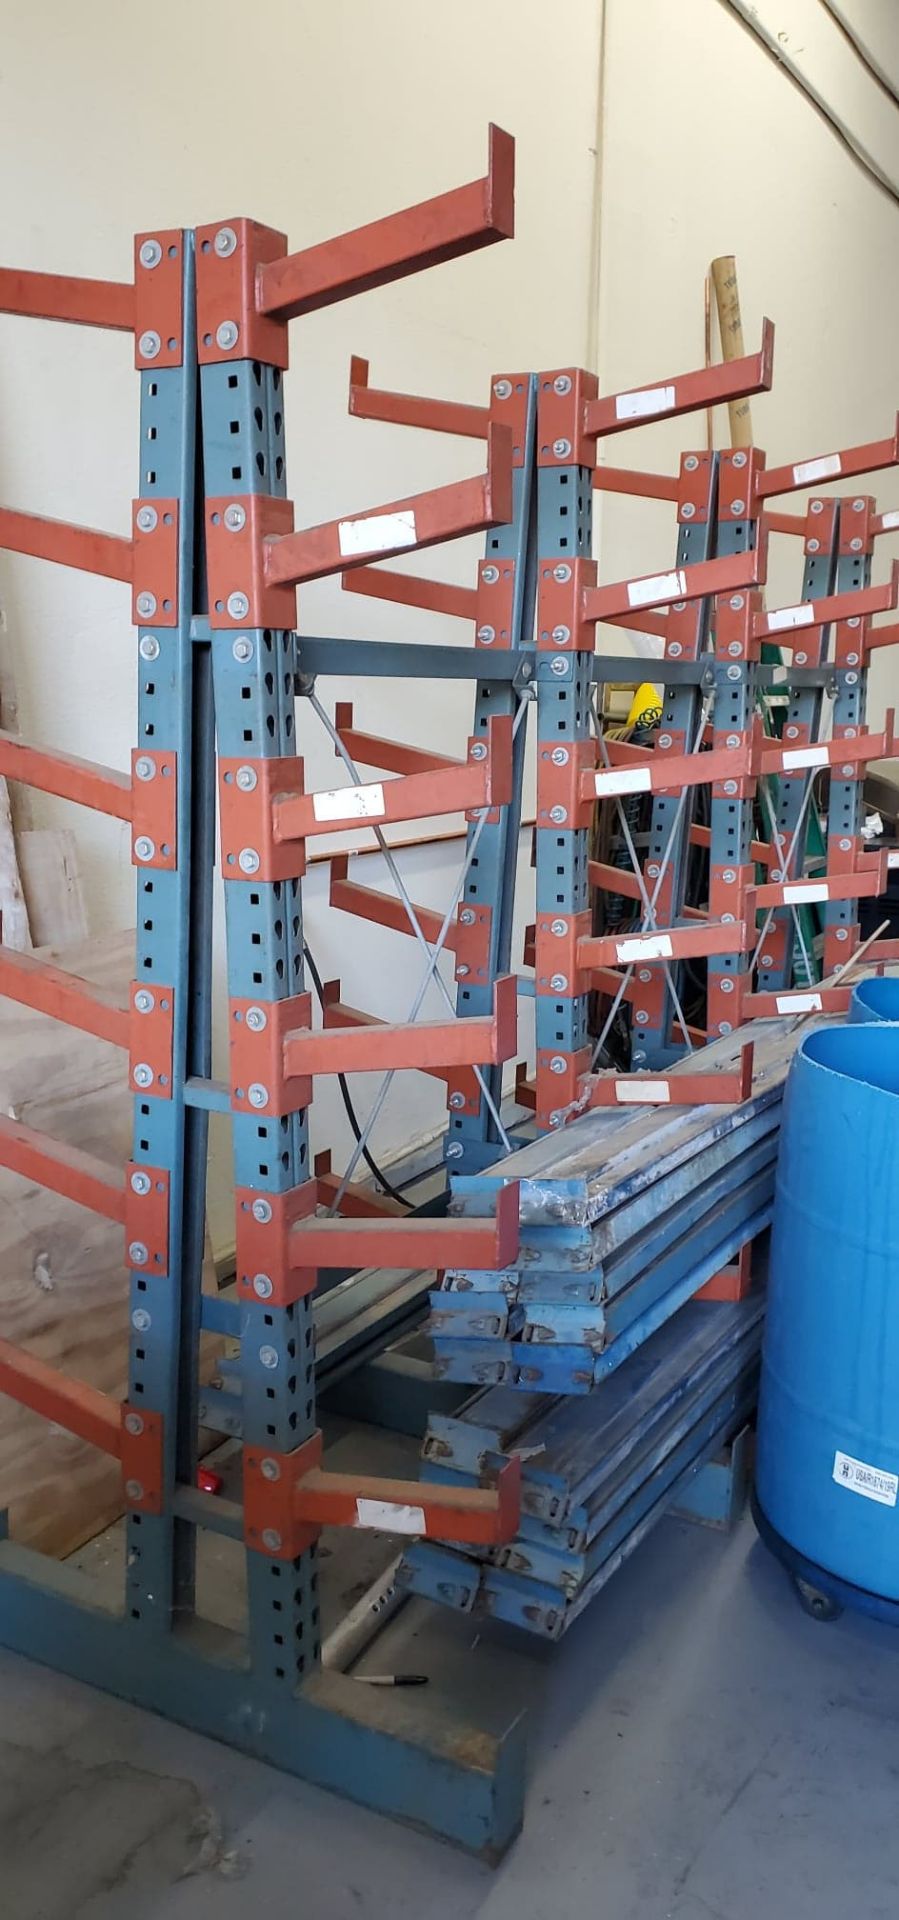 2-Sided Cantilever Material Rack ONLY NO Content (SOLD AS-IS - NO WARRANTY) - Image 2 of 2